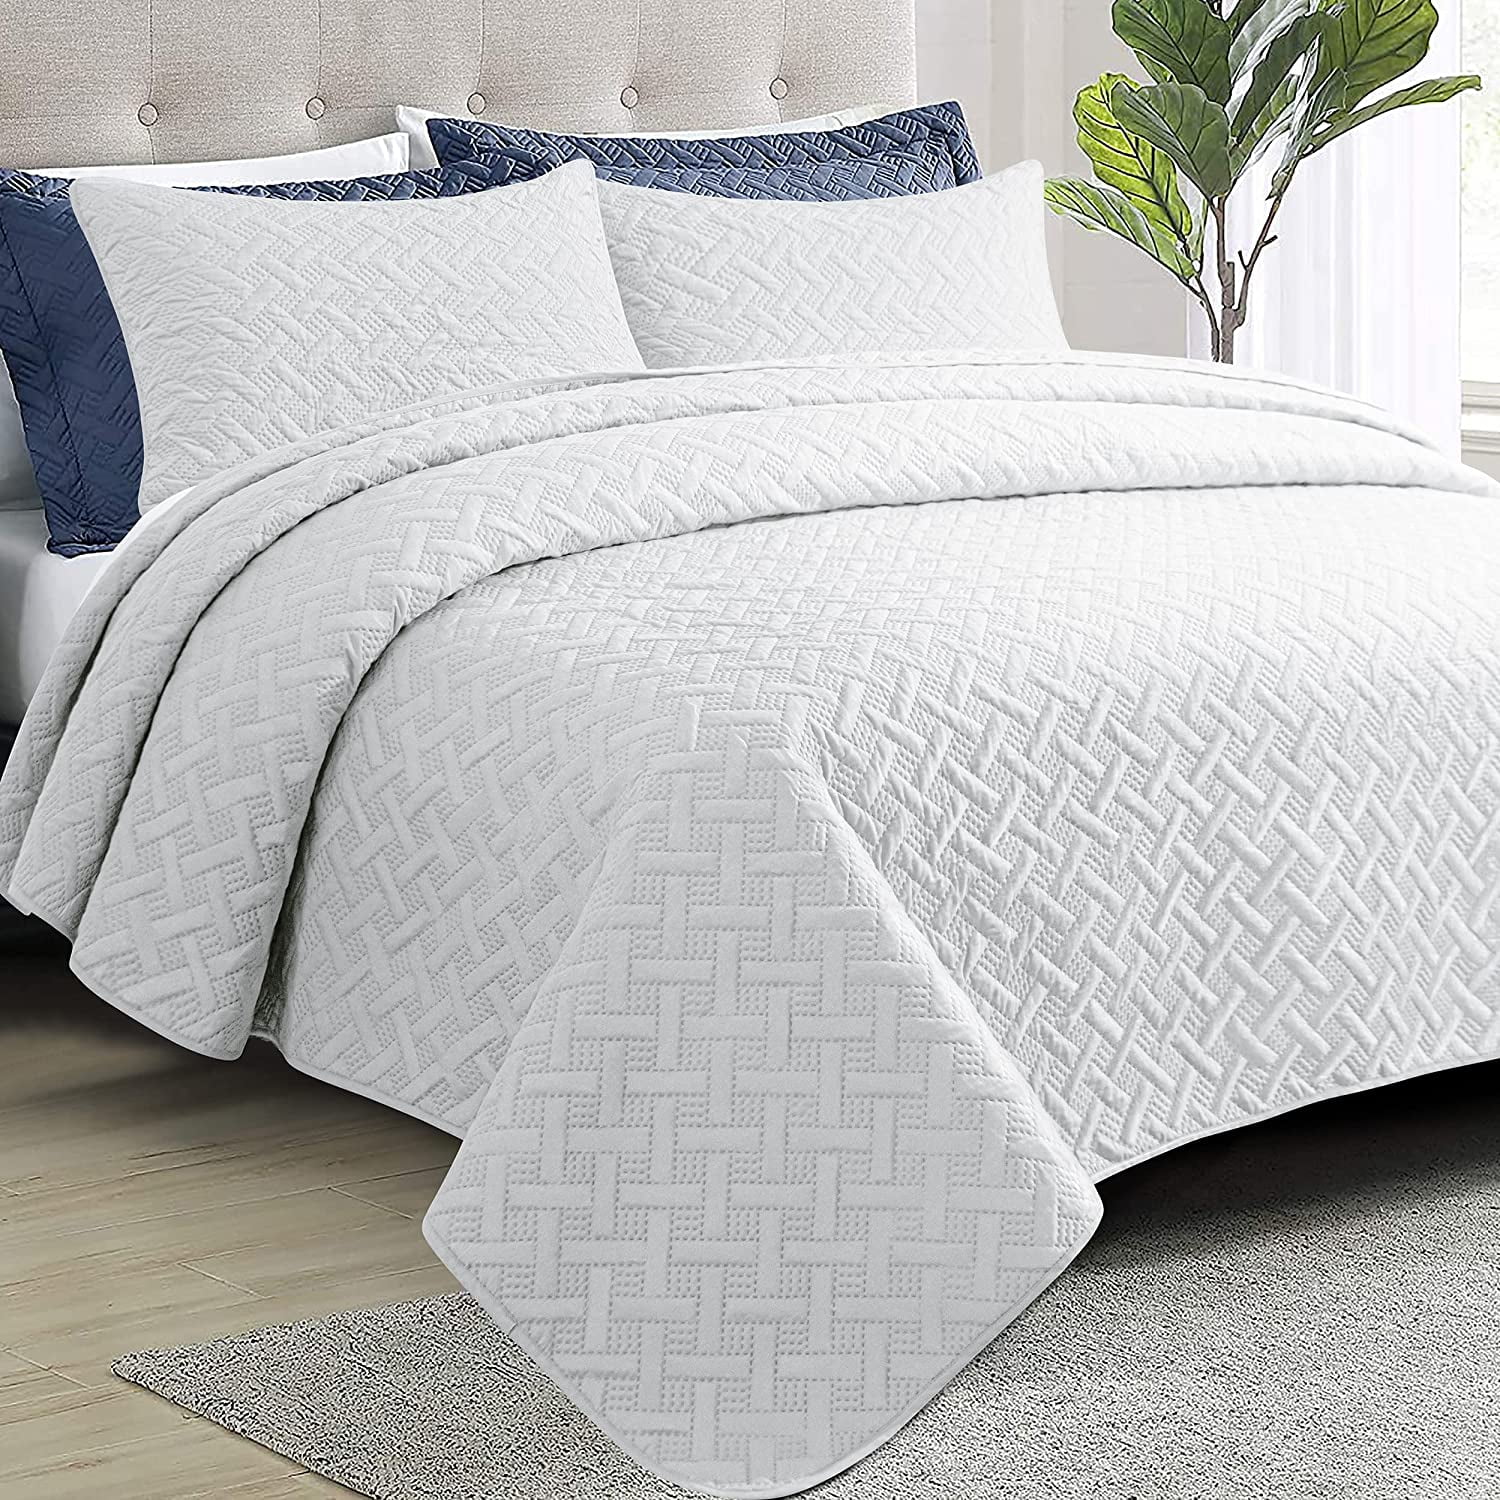 BEAUTIFUL XXL OVERSIZED WHITE VINTAGE CLASSIC TEXTURE BEDSPREAD QUILT SET KING ~ 